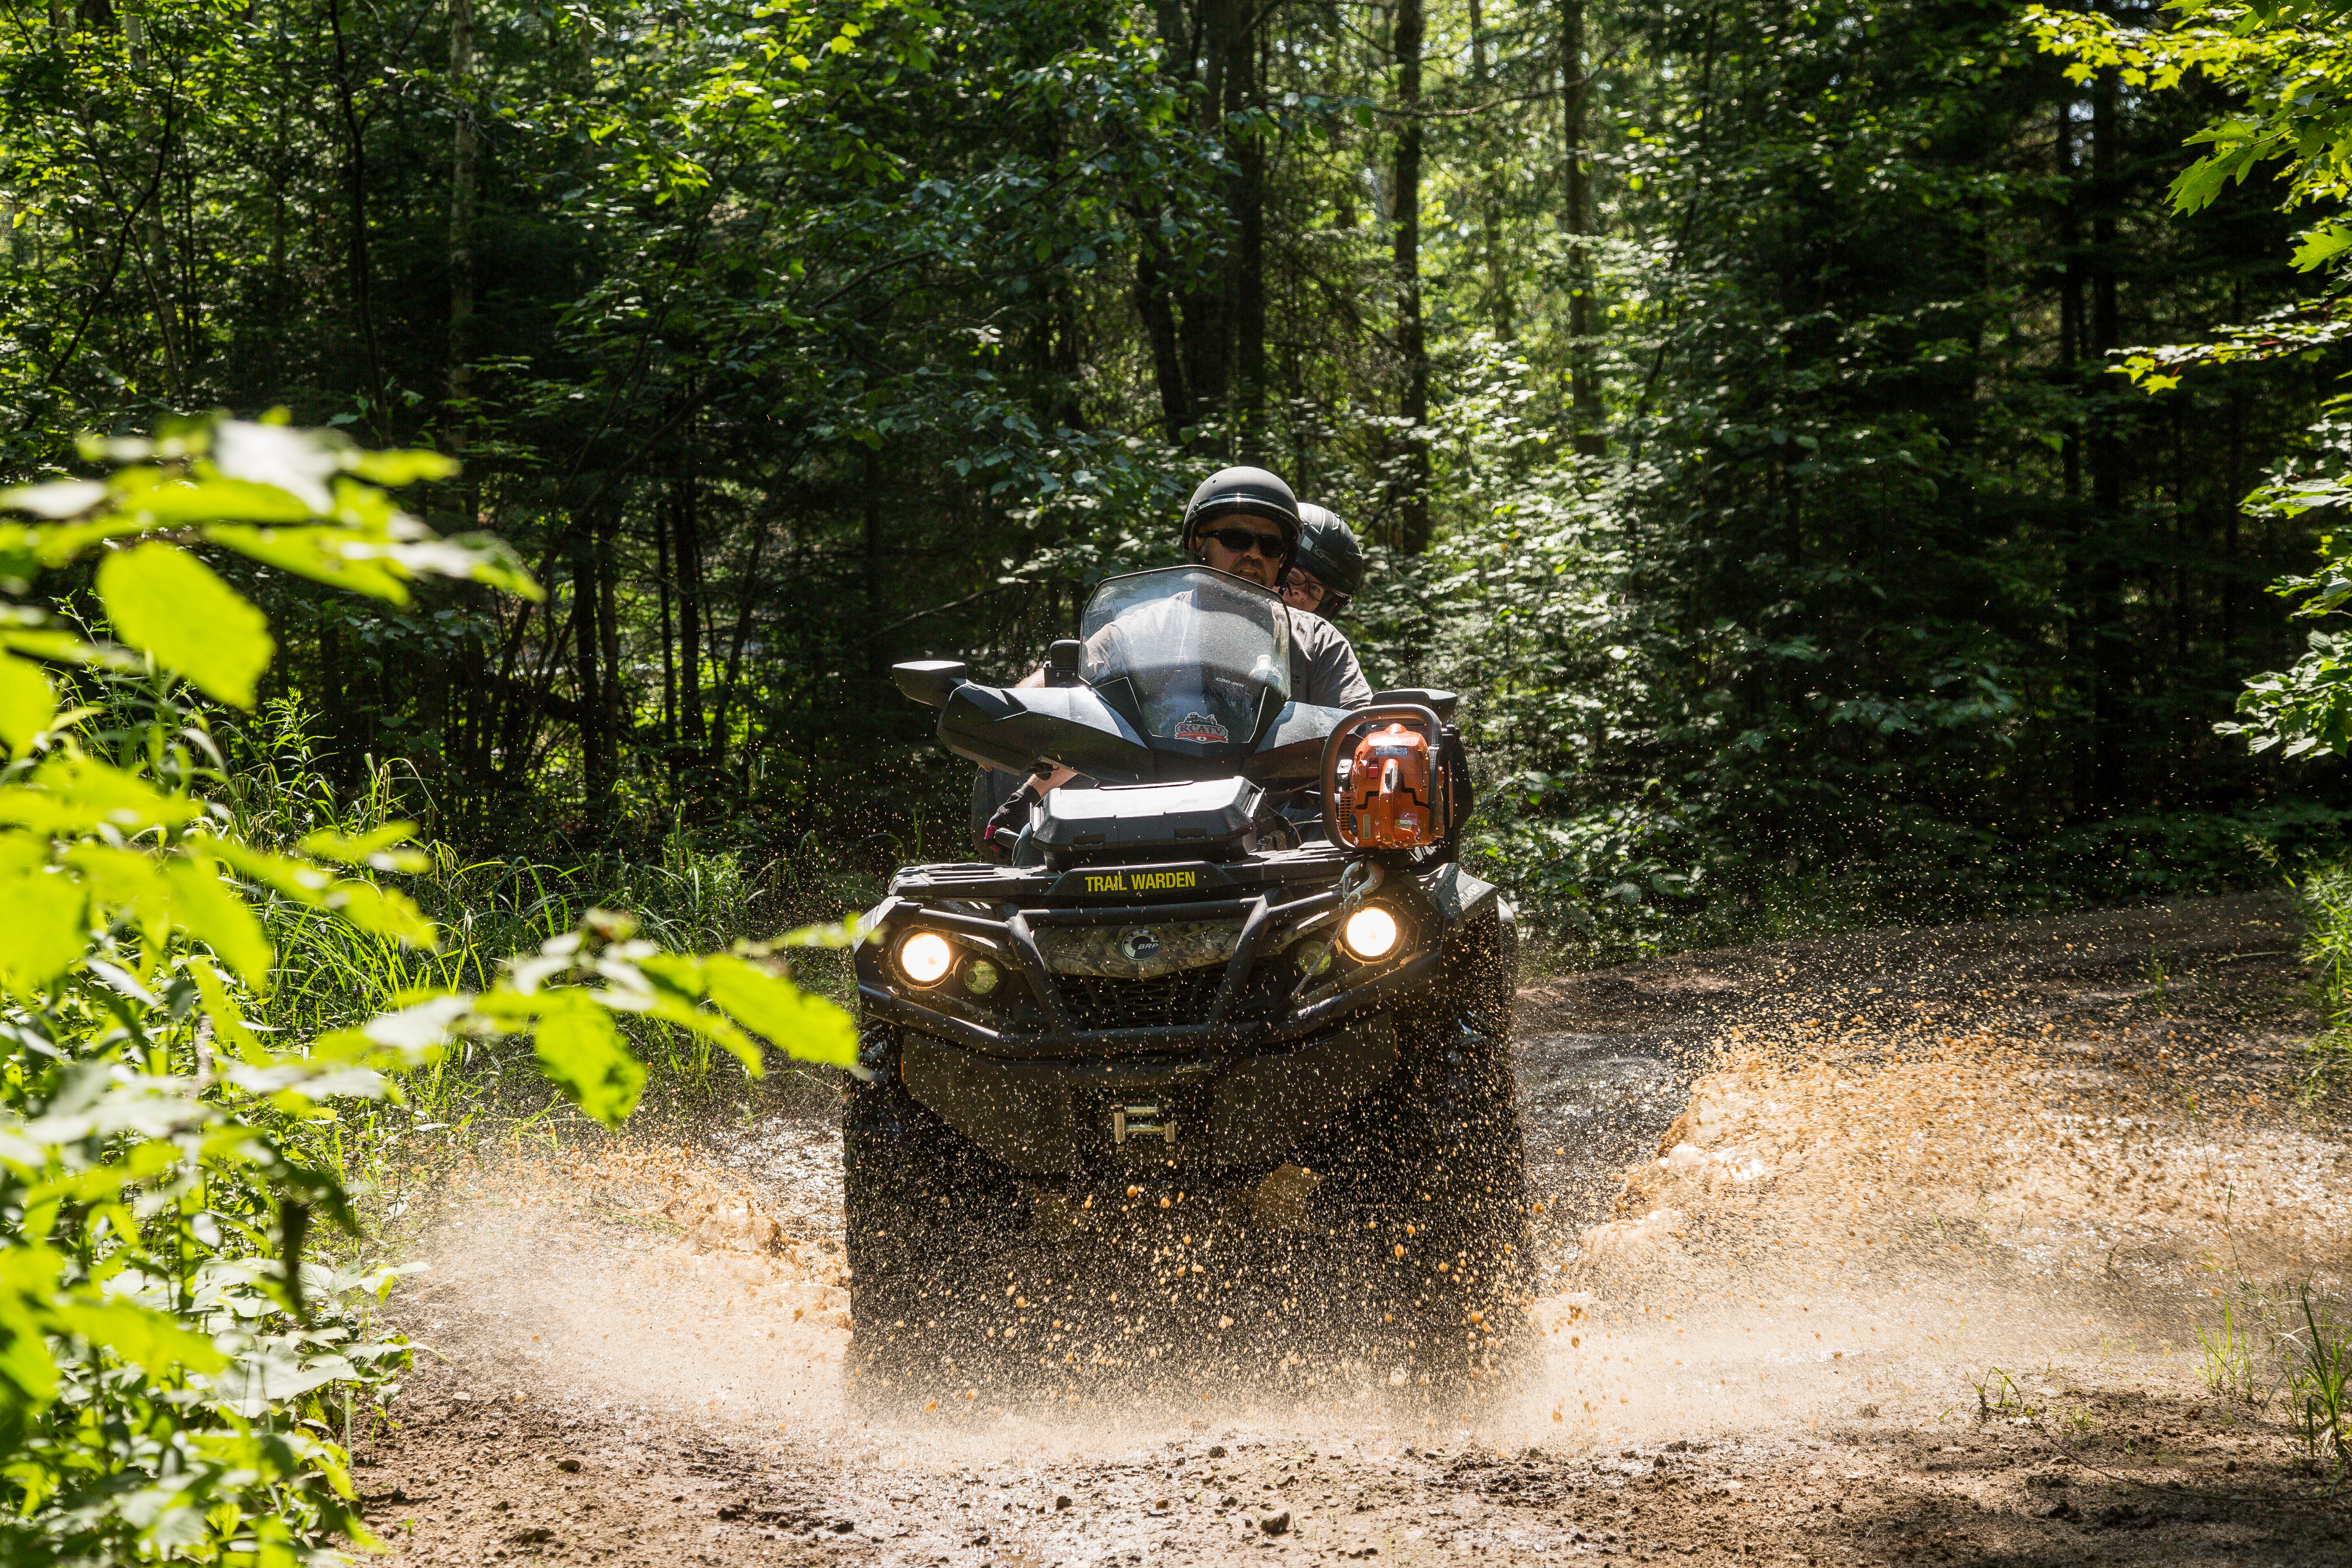 An ATV with two riders rolling down a dirt trail on a sunny day, surrounded in tall, lush green forest. The ATV is splashing up muddy water that catches the sunlight and appears to glow.